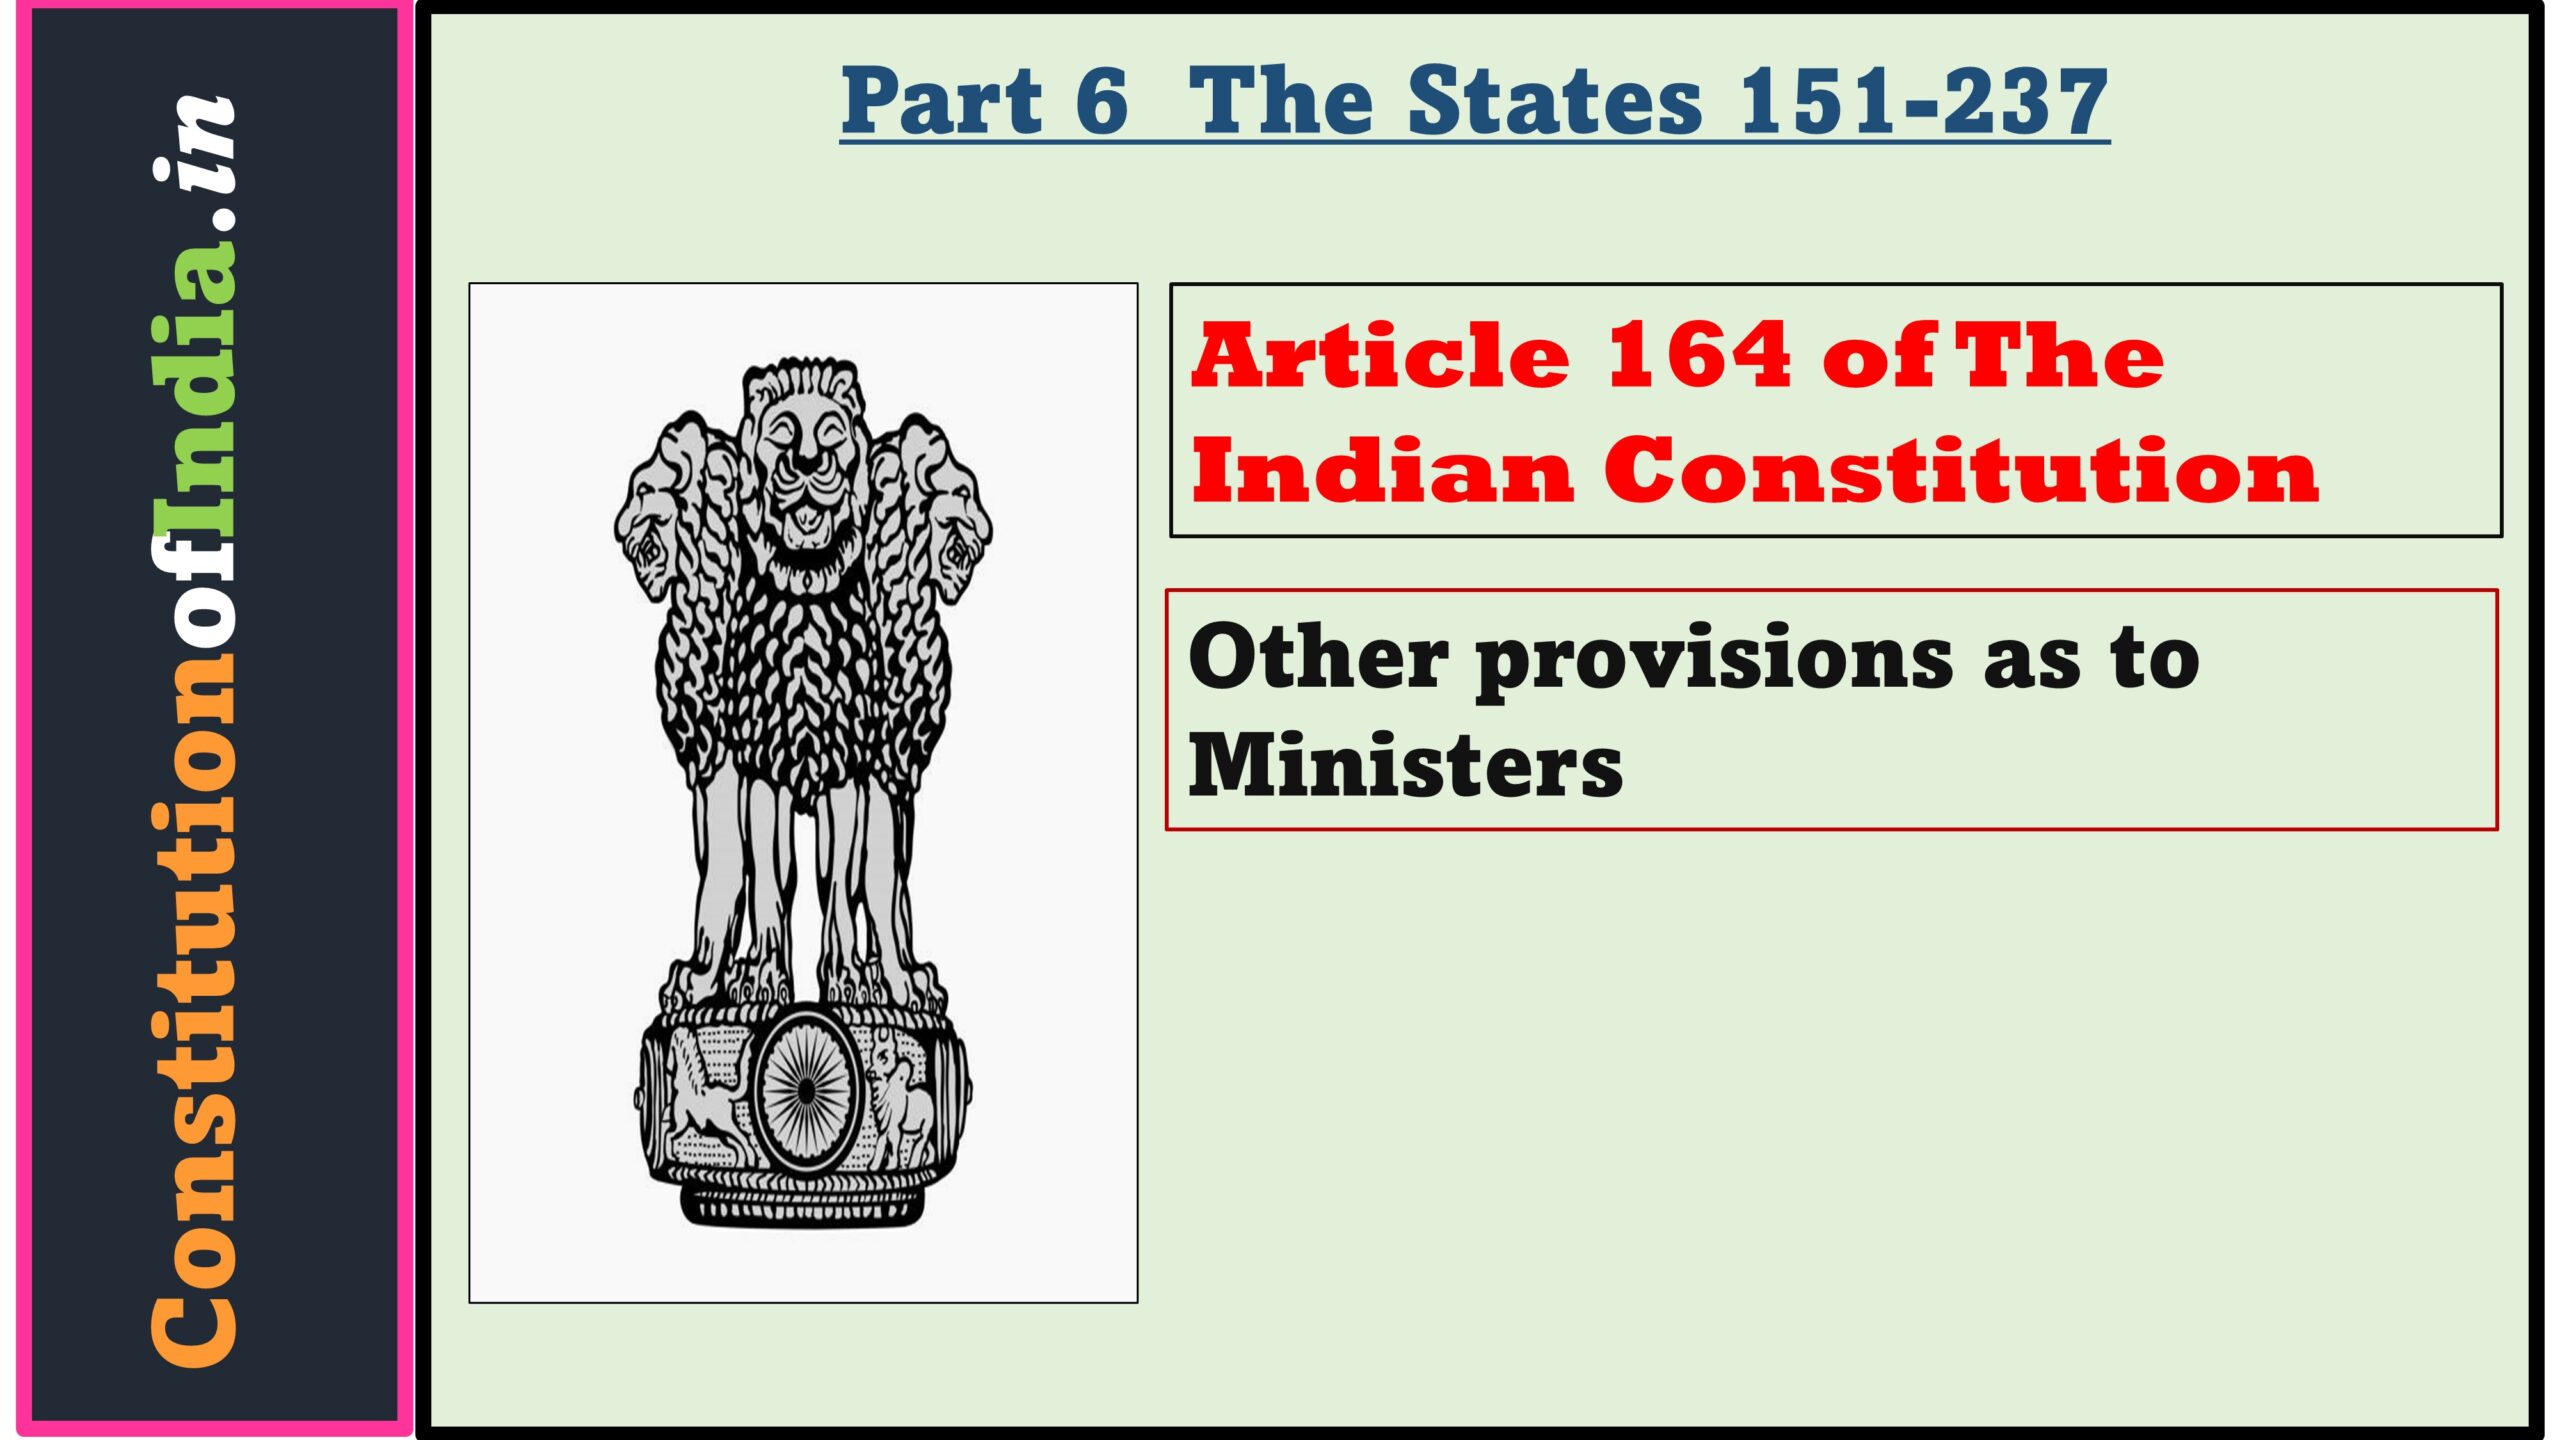 Article 164 of The Indian Constitution